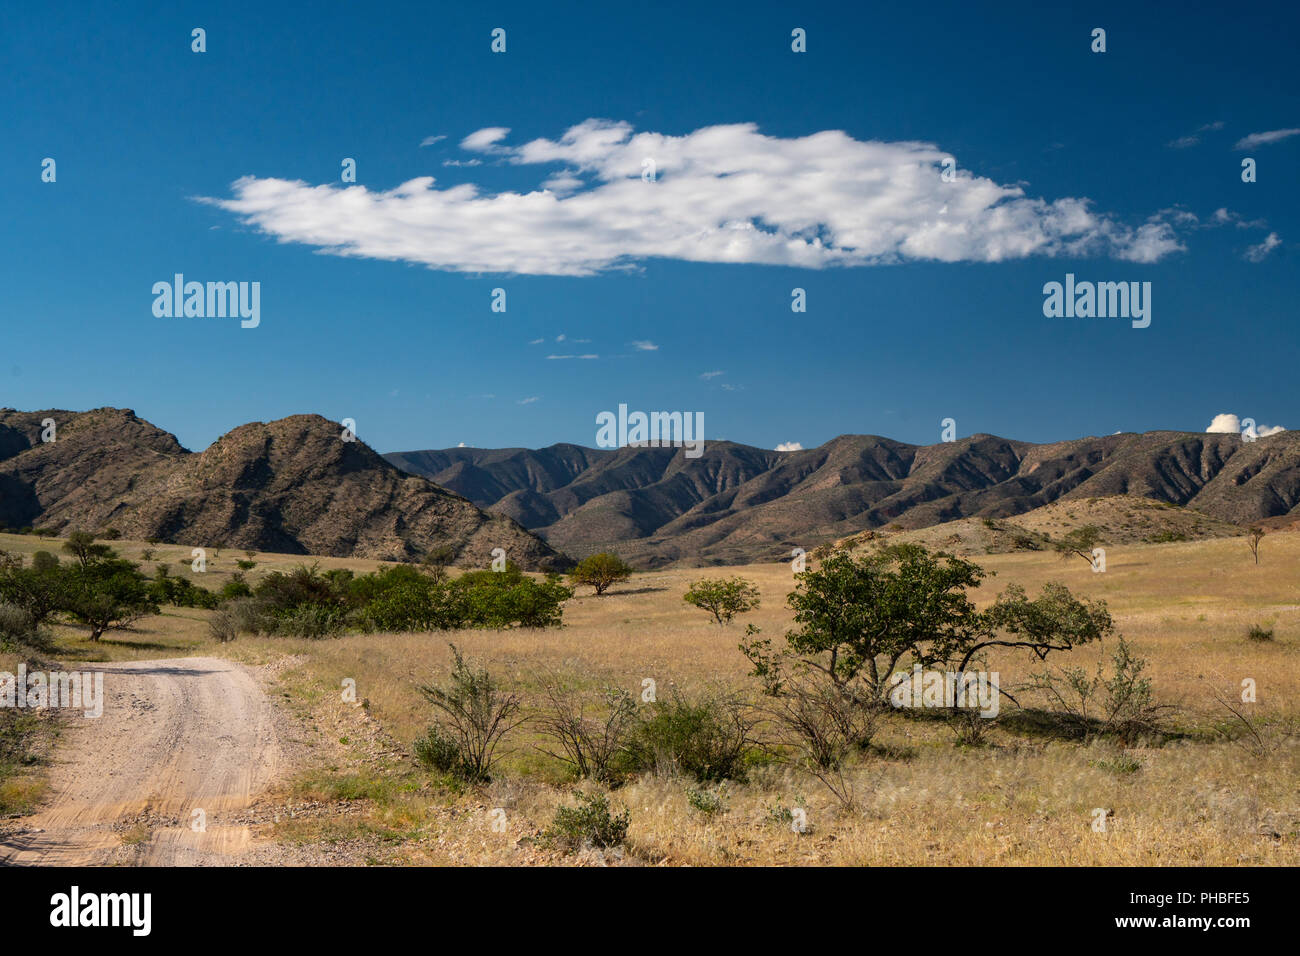 Dramatic cloud over green and mountainous landscape, north of Sesfontein, Namibia, Africa Stock Photo